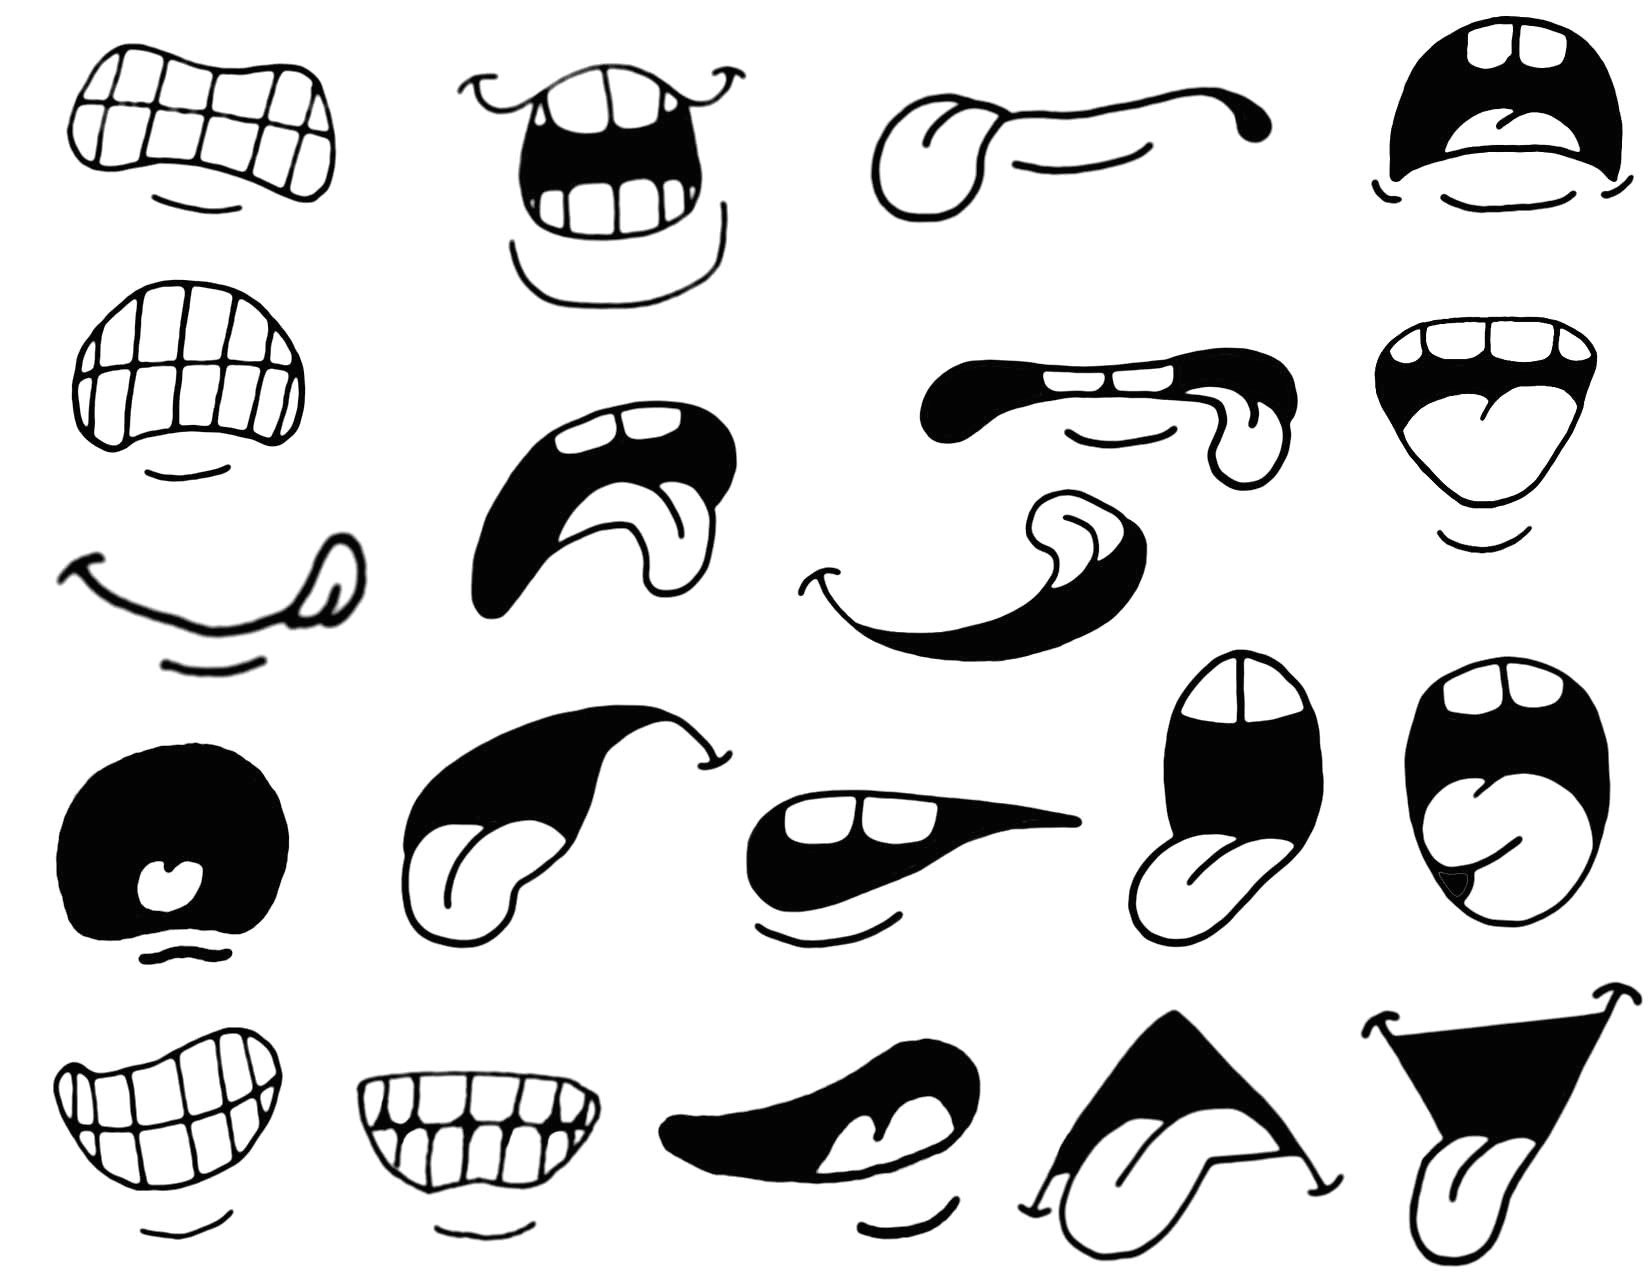 Drawing Cute Mouth Pictures Of Cartoon Mouths Group with 65 Items